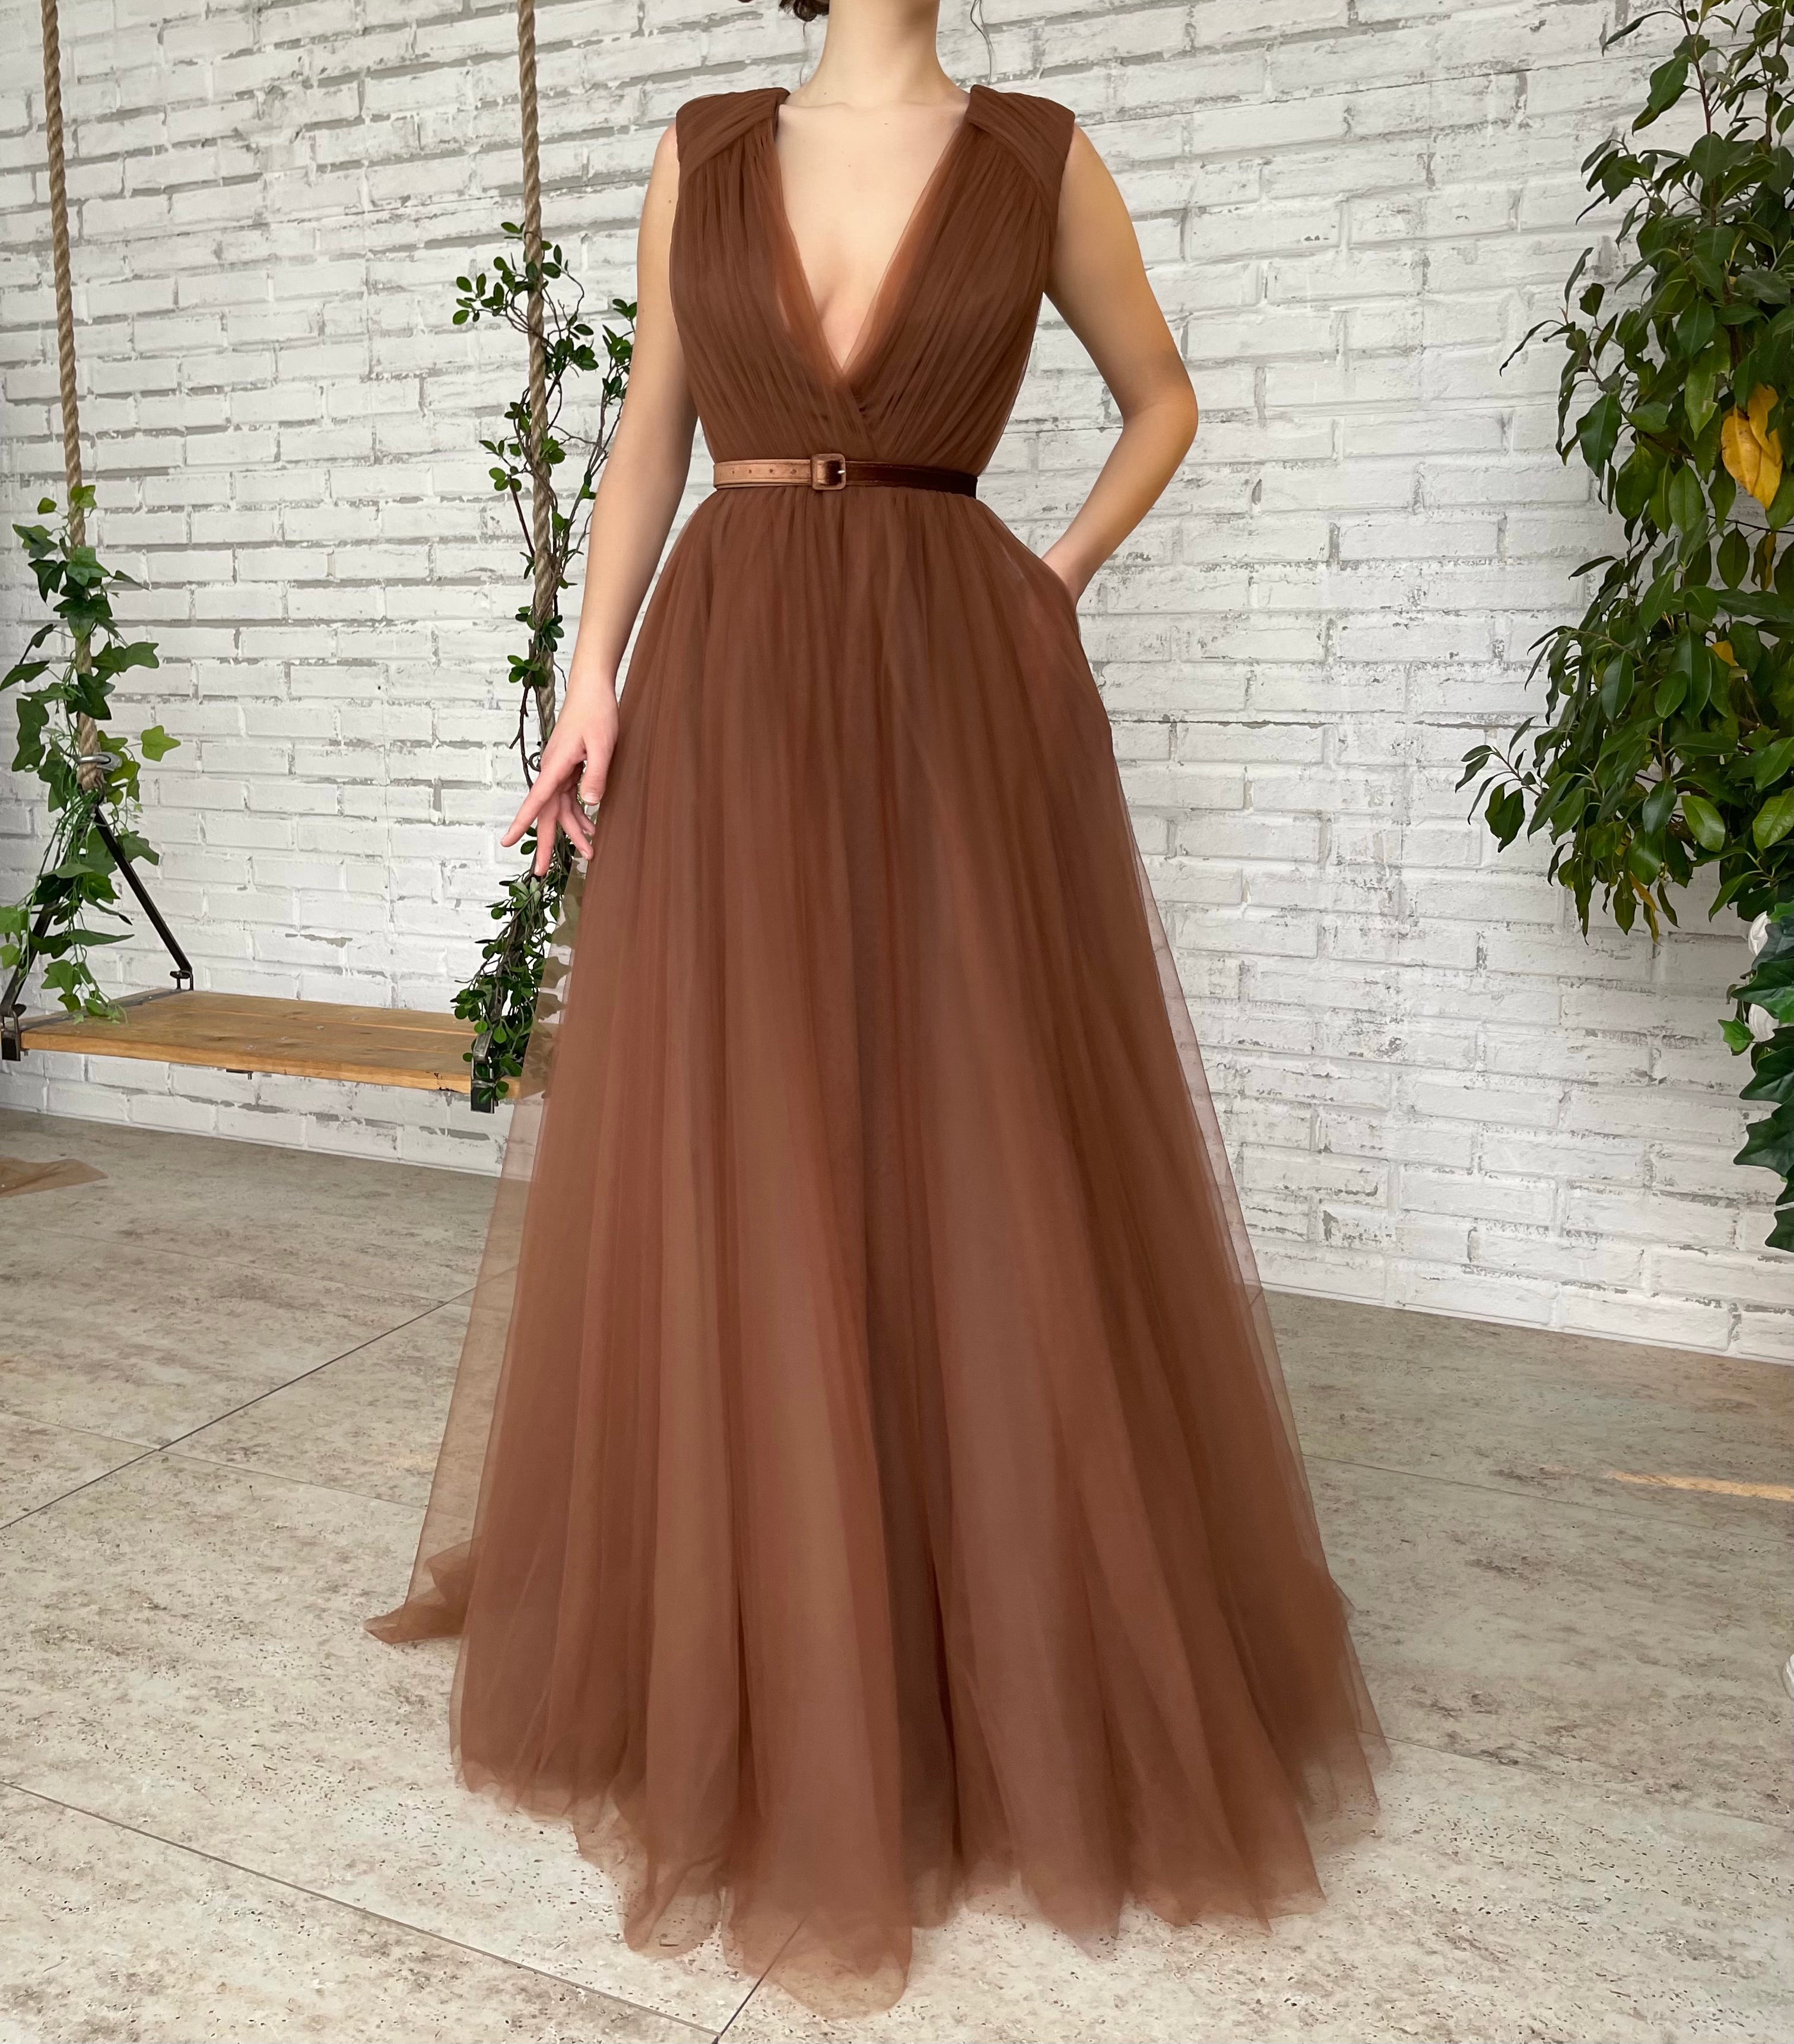 Brown A-Line dress with belt, no sleeves and v-neck